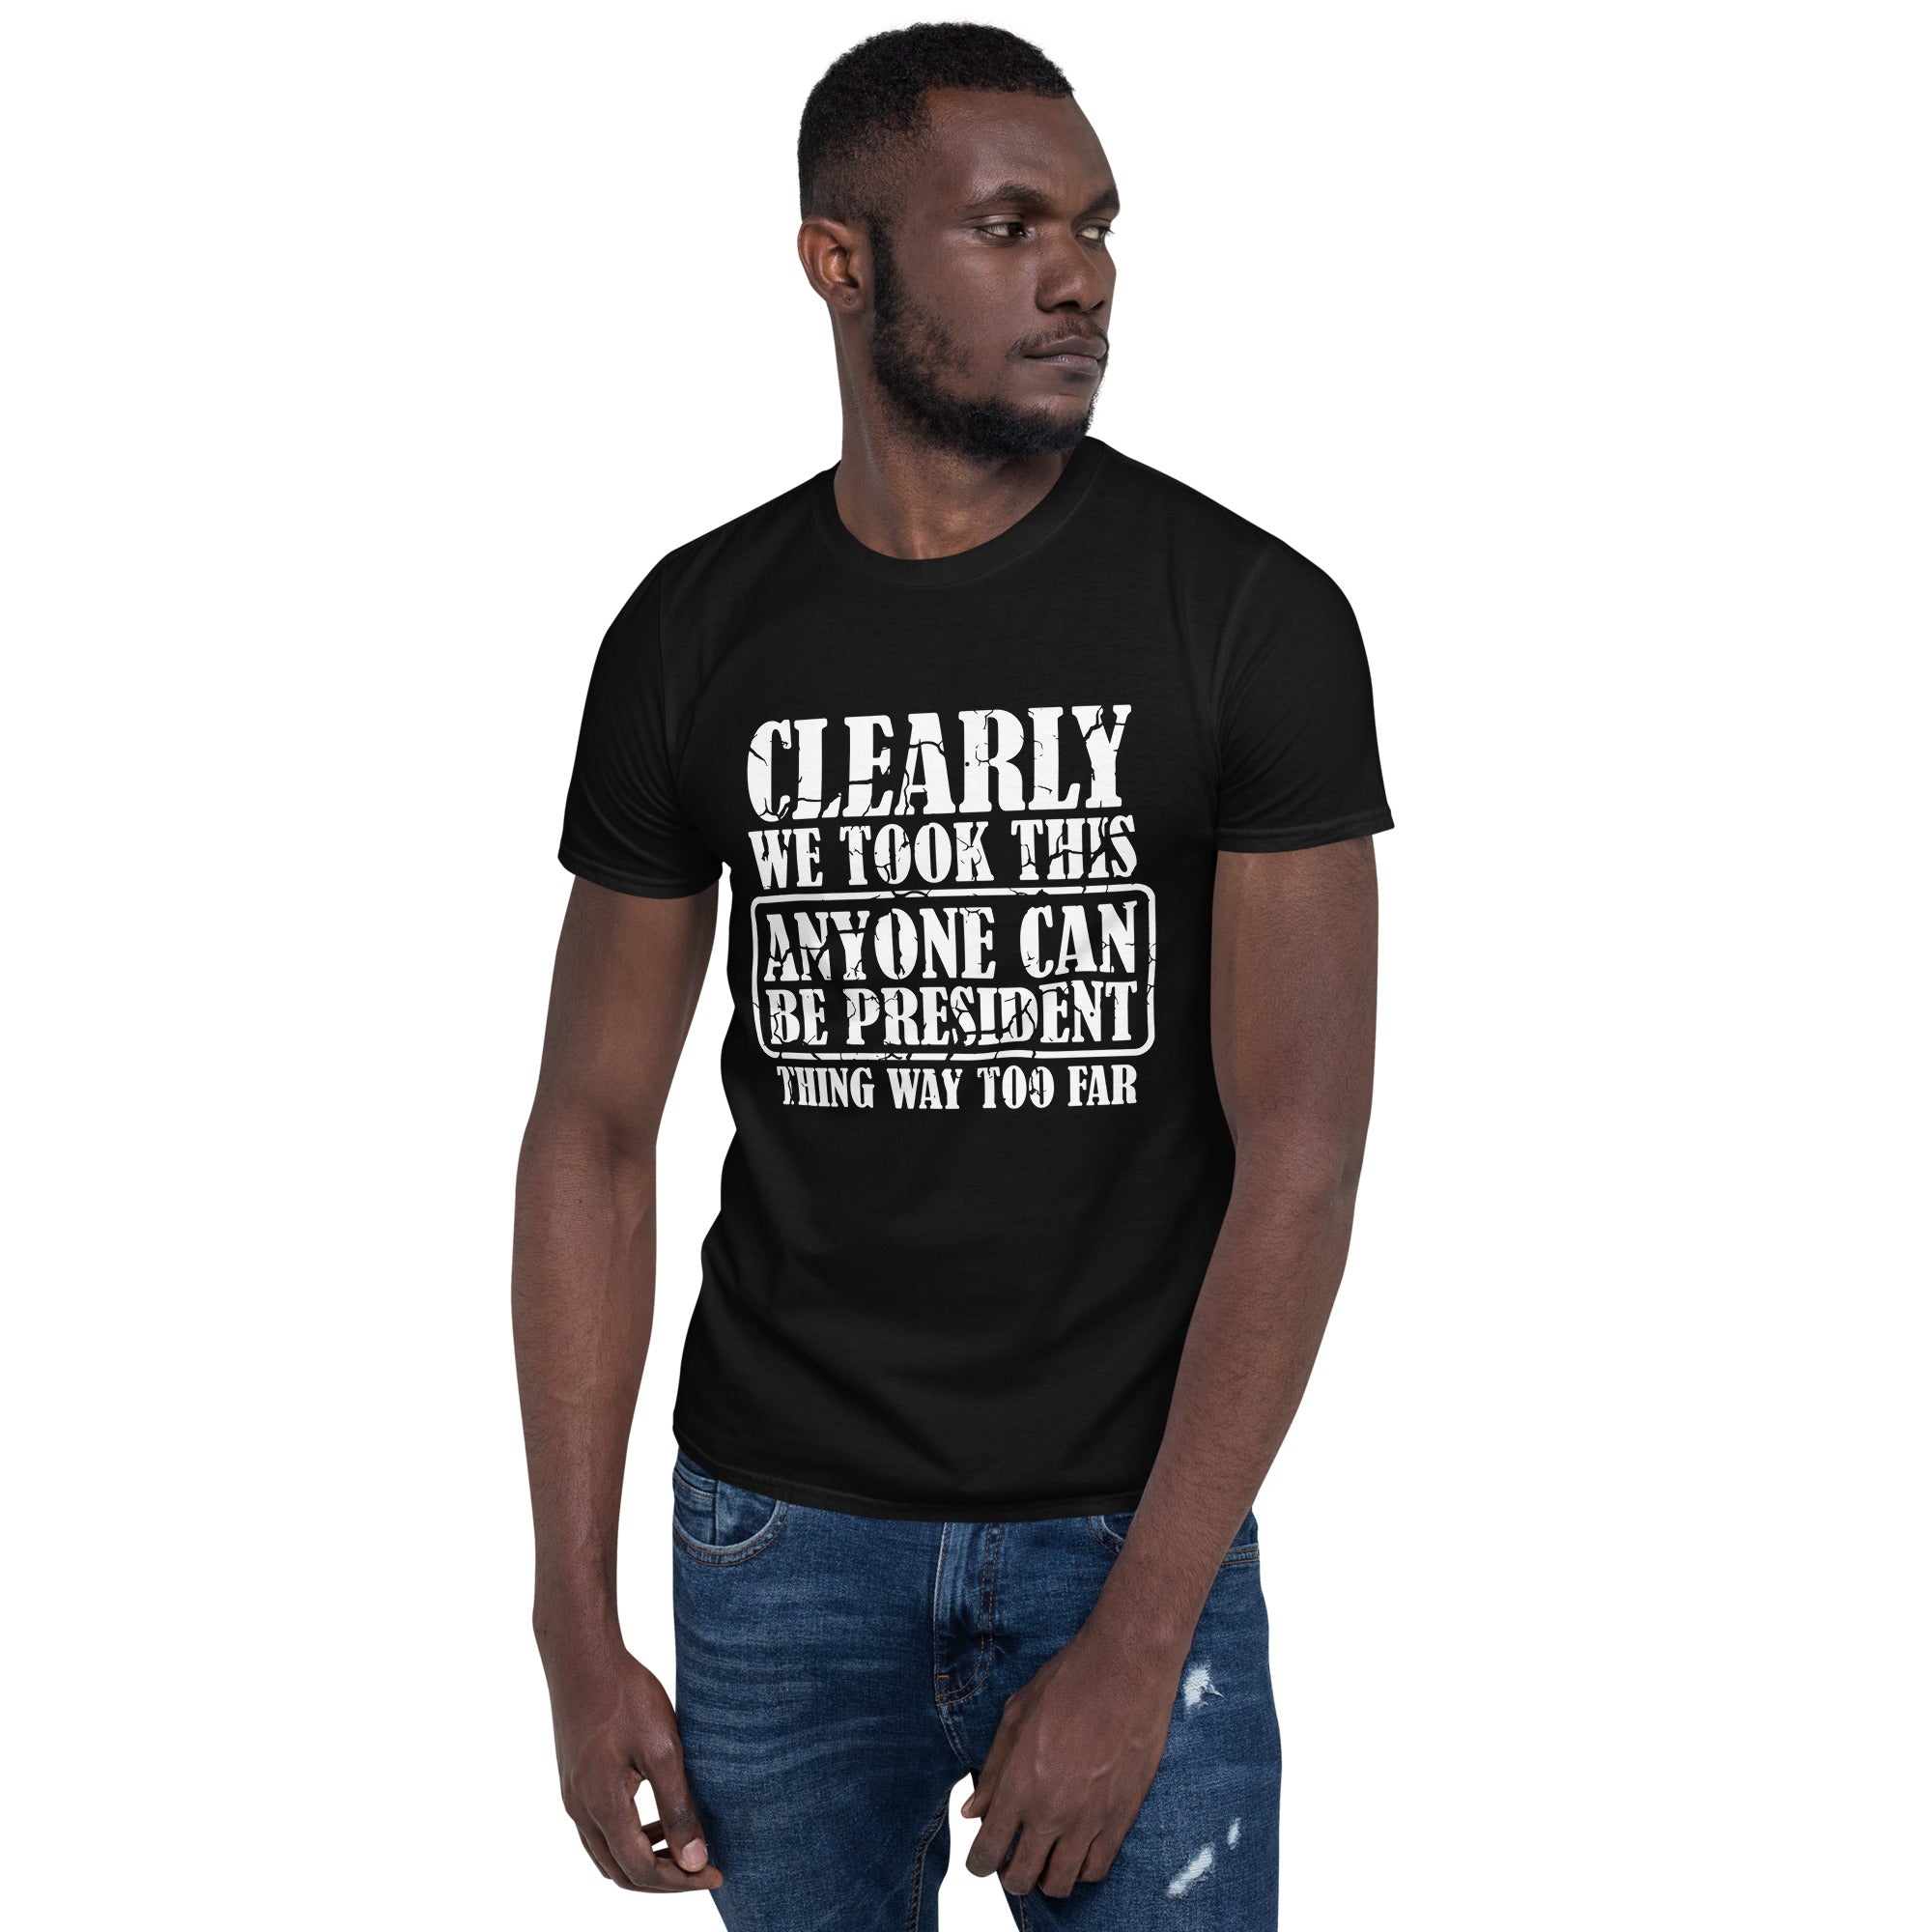 Anyone Can Be A President - Short-Sleeve Unisex T-Shirt